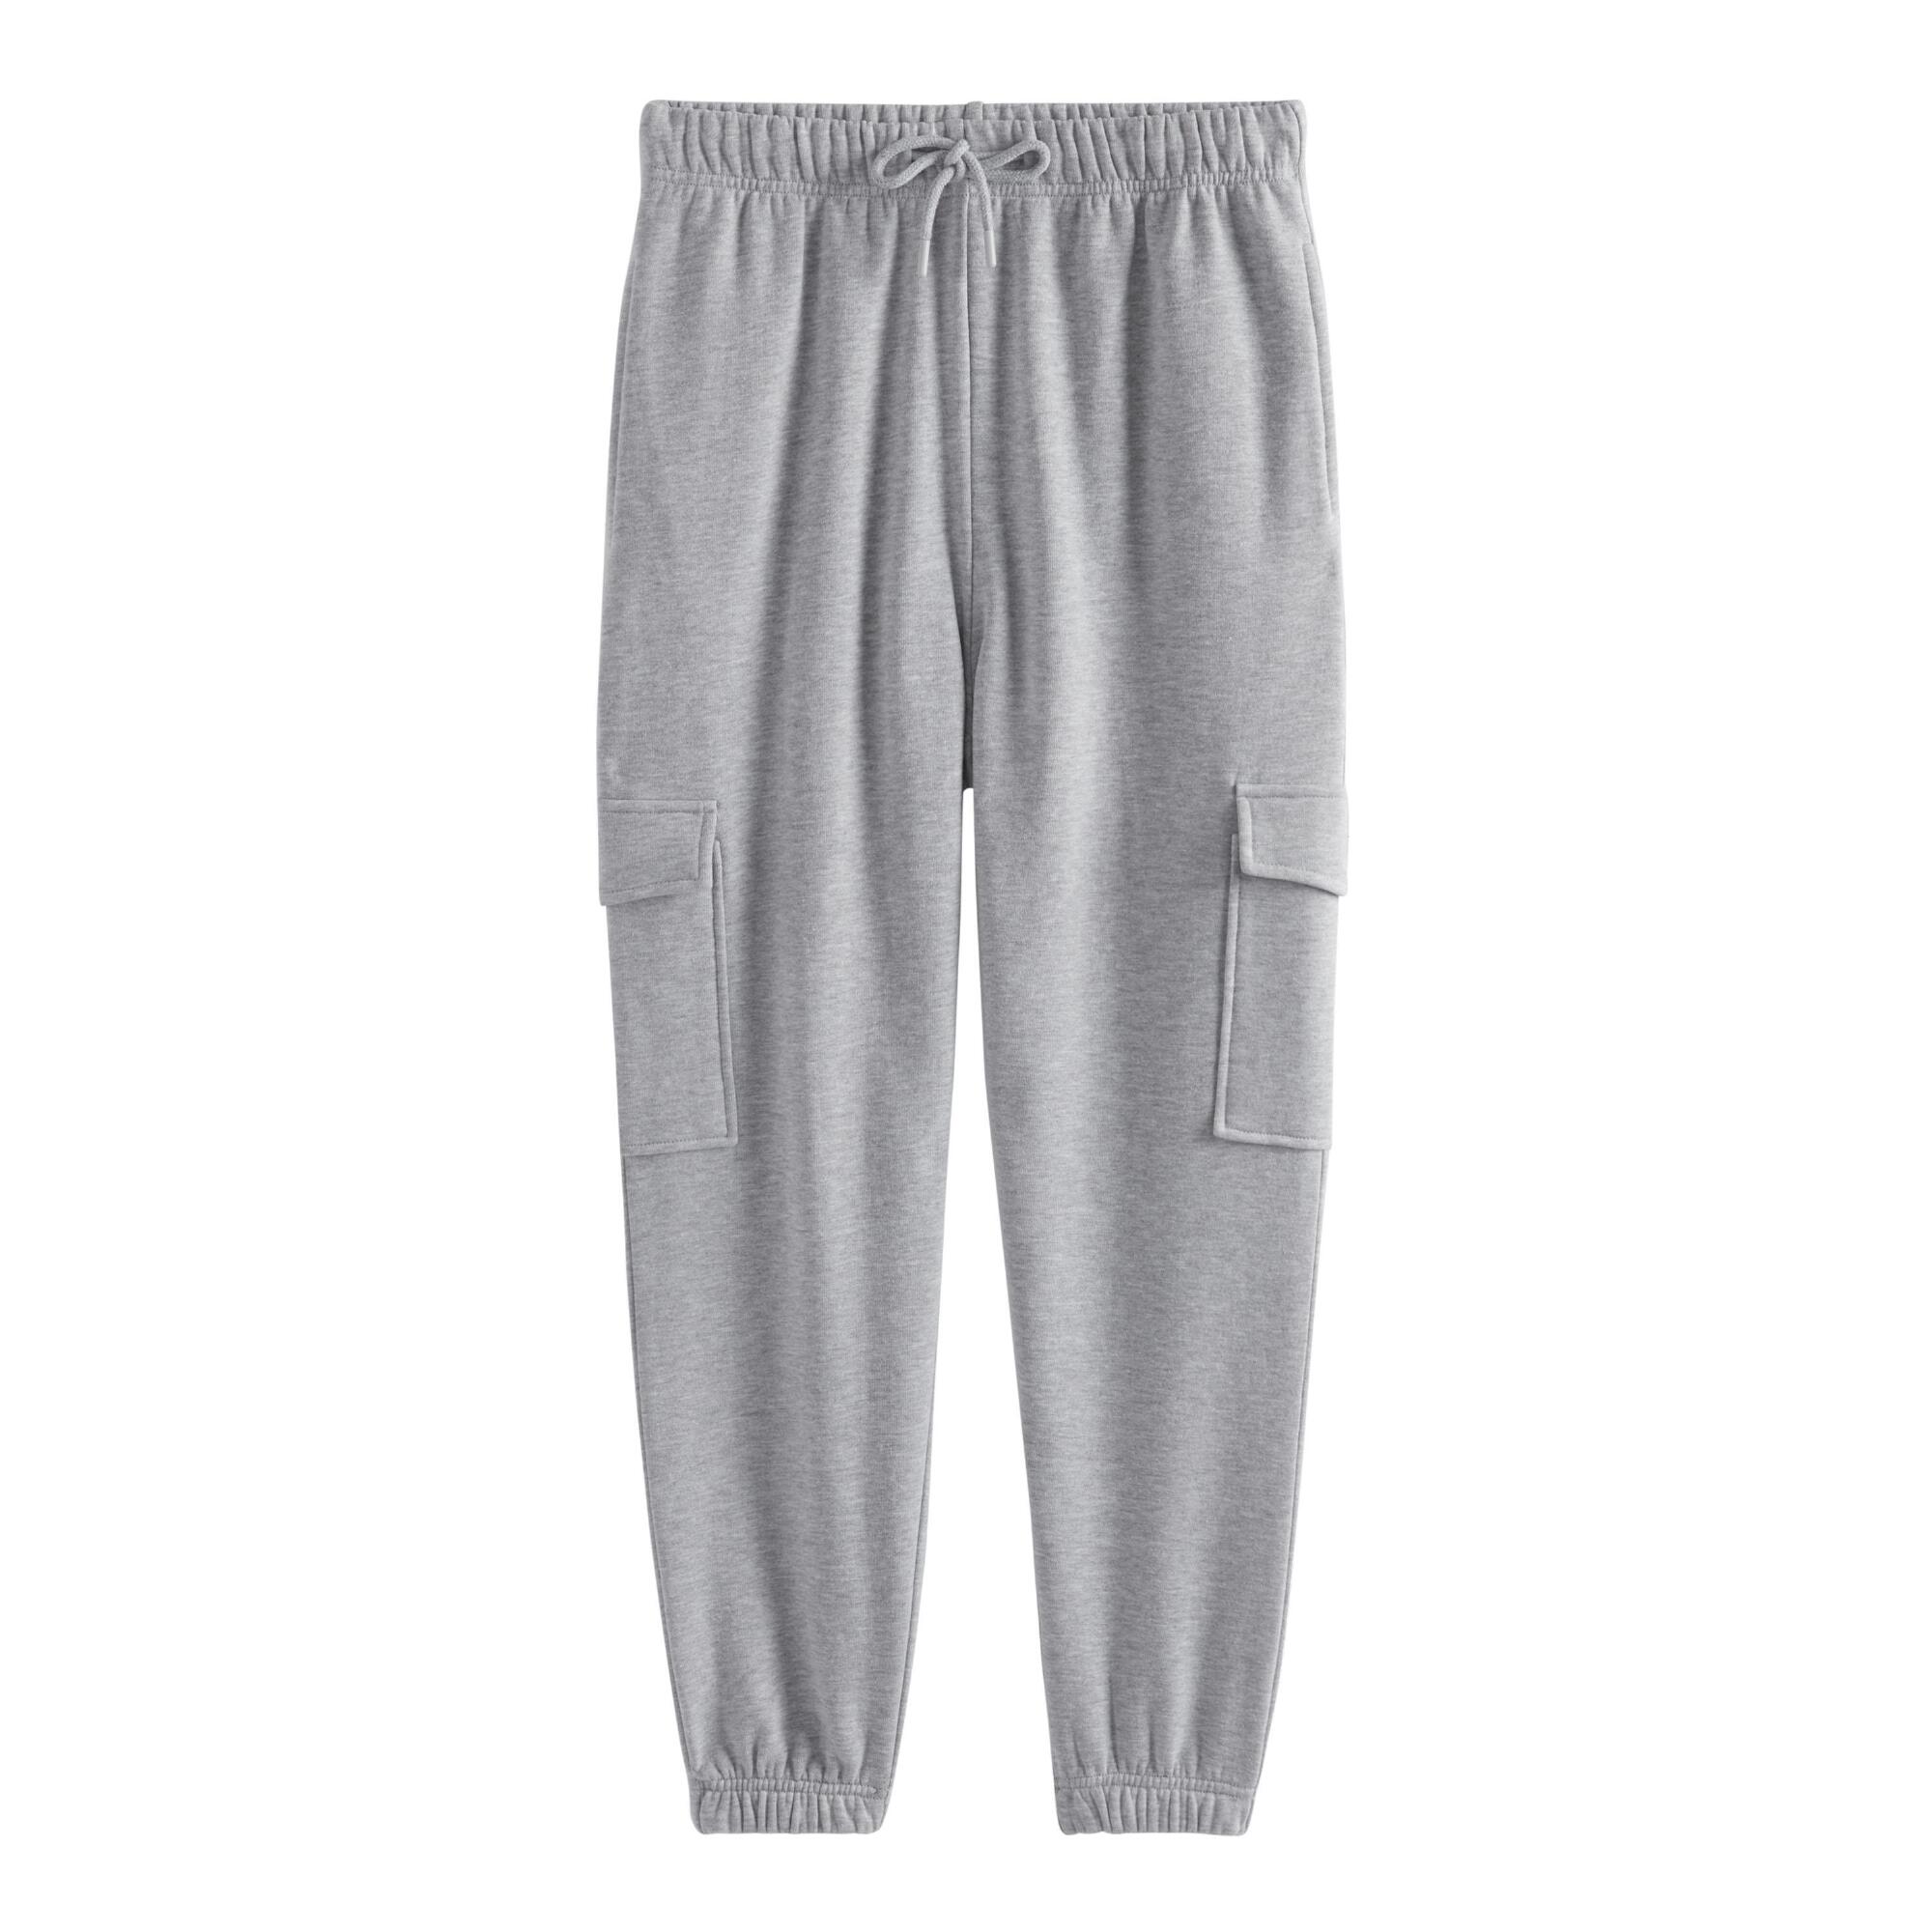 Heathered Gray Fleece Cargo Lounge Pants With Pockets - Large by World Market